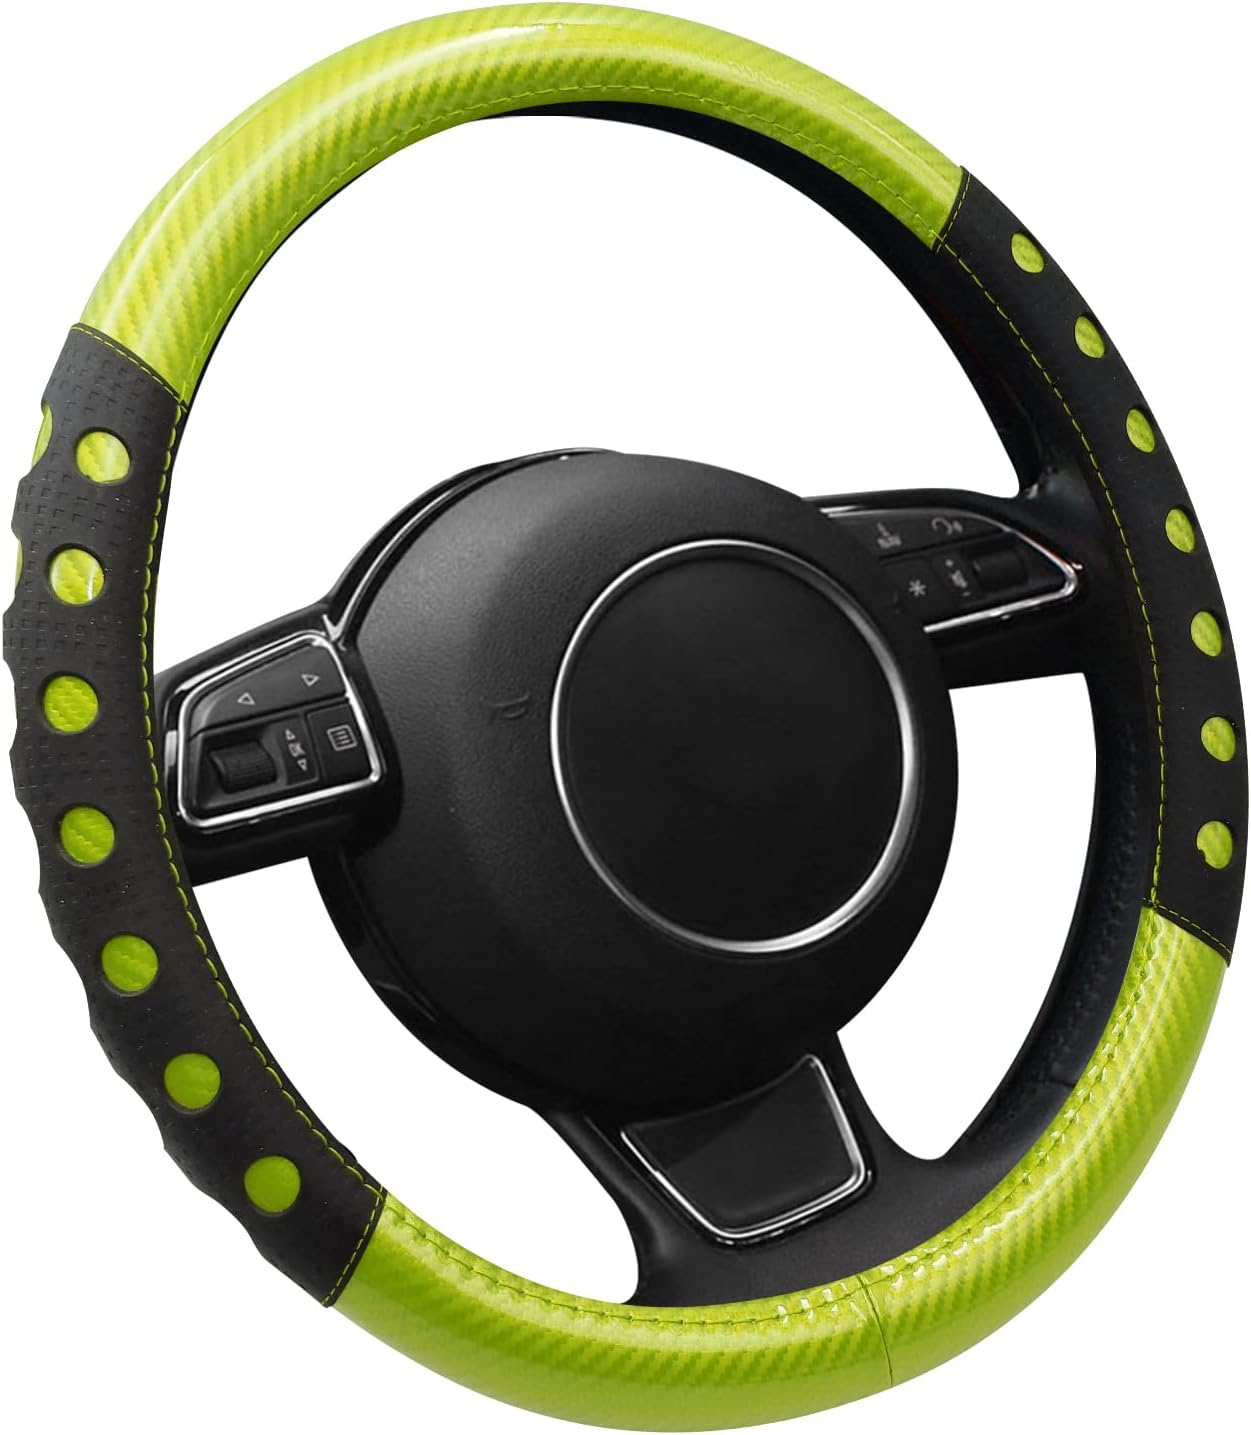 Xiladoso Dont Tread On Me Car Elastic Steering Wheel Protective Cover Universal Breathable Anti Slip Decoration 